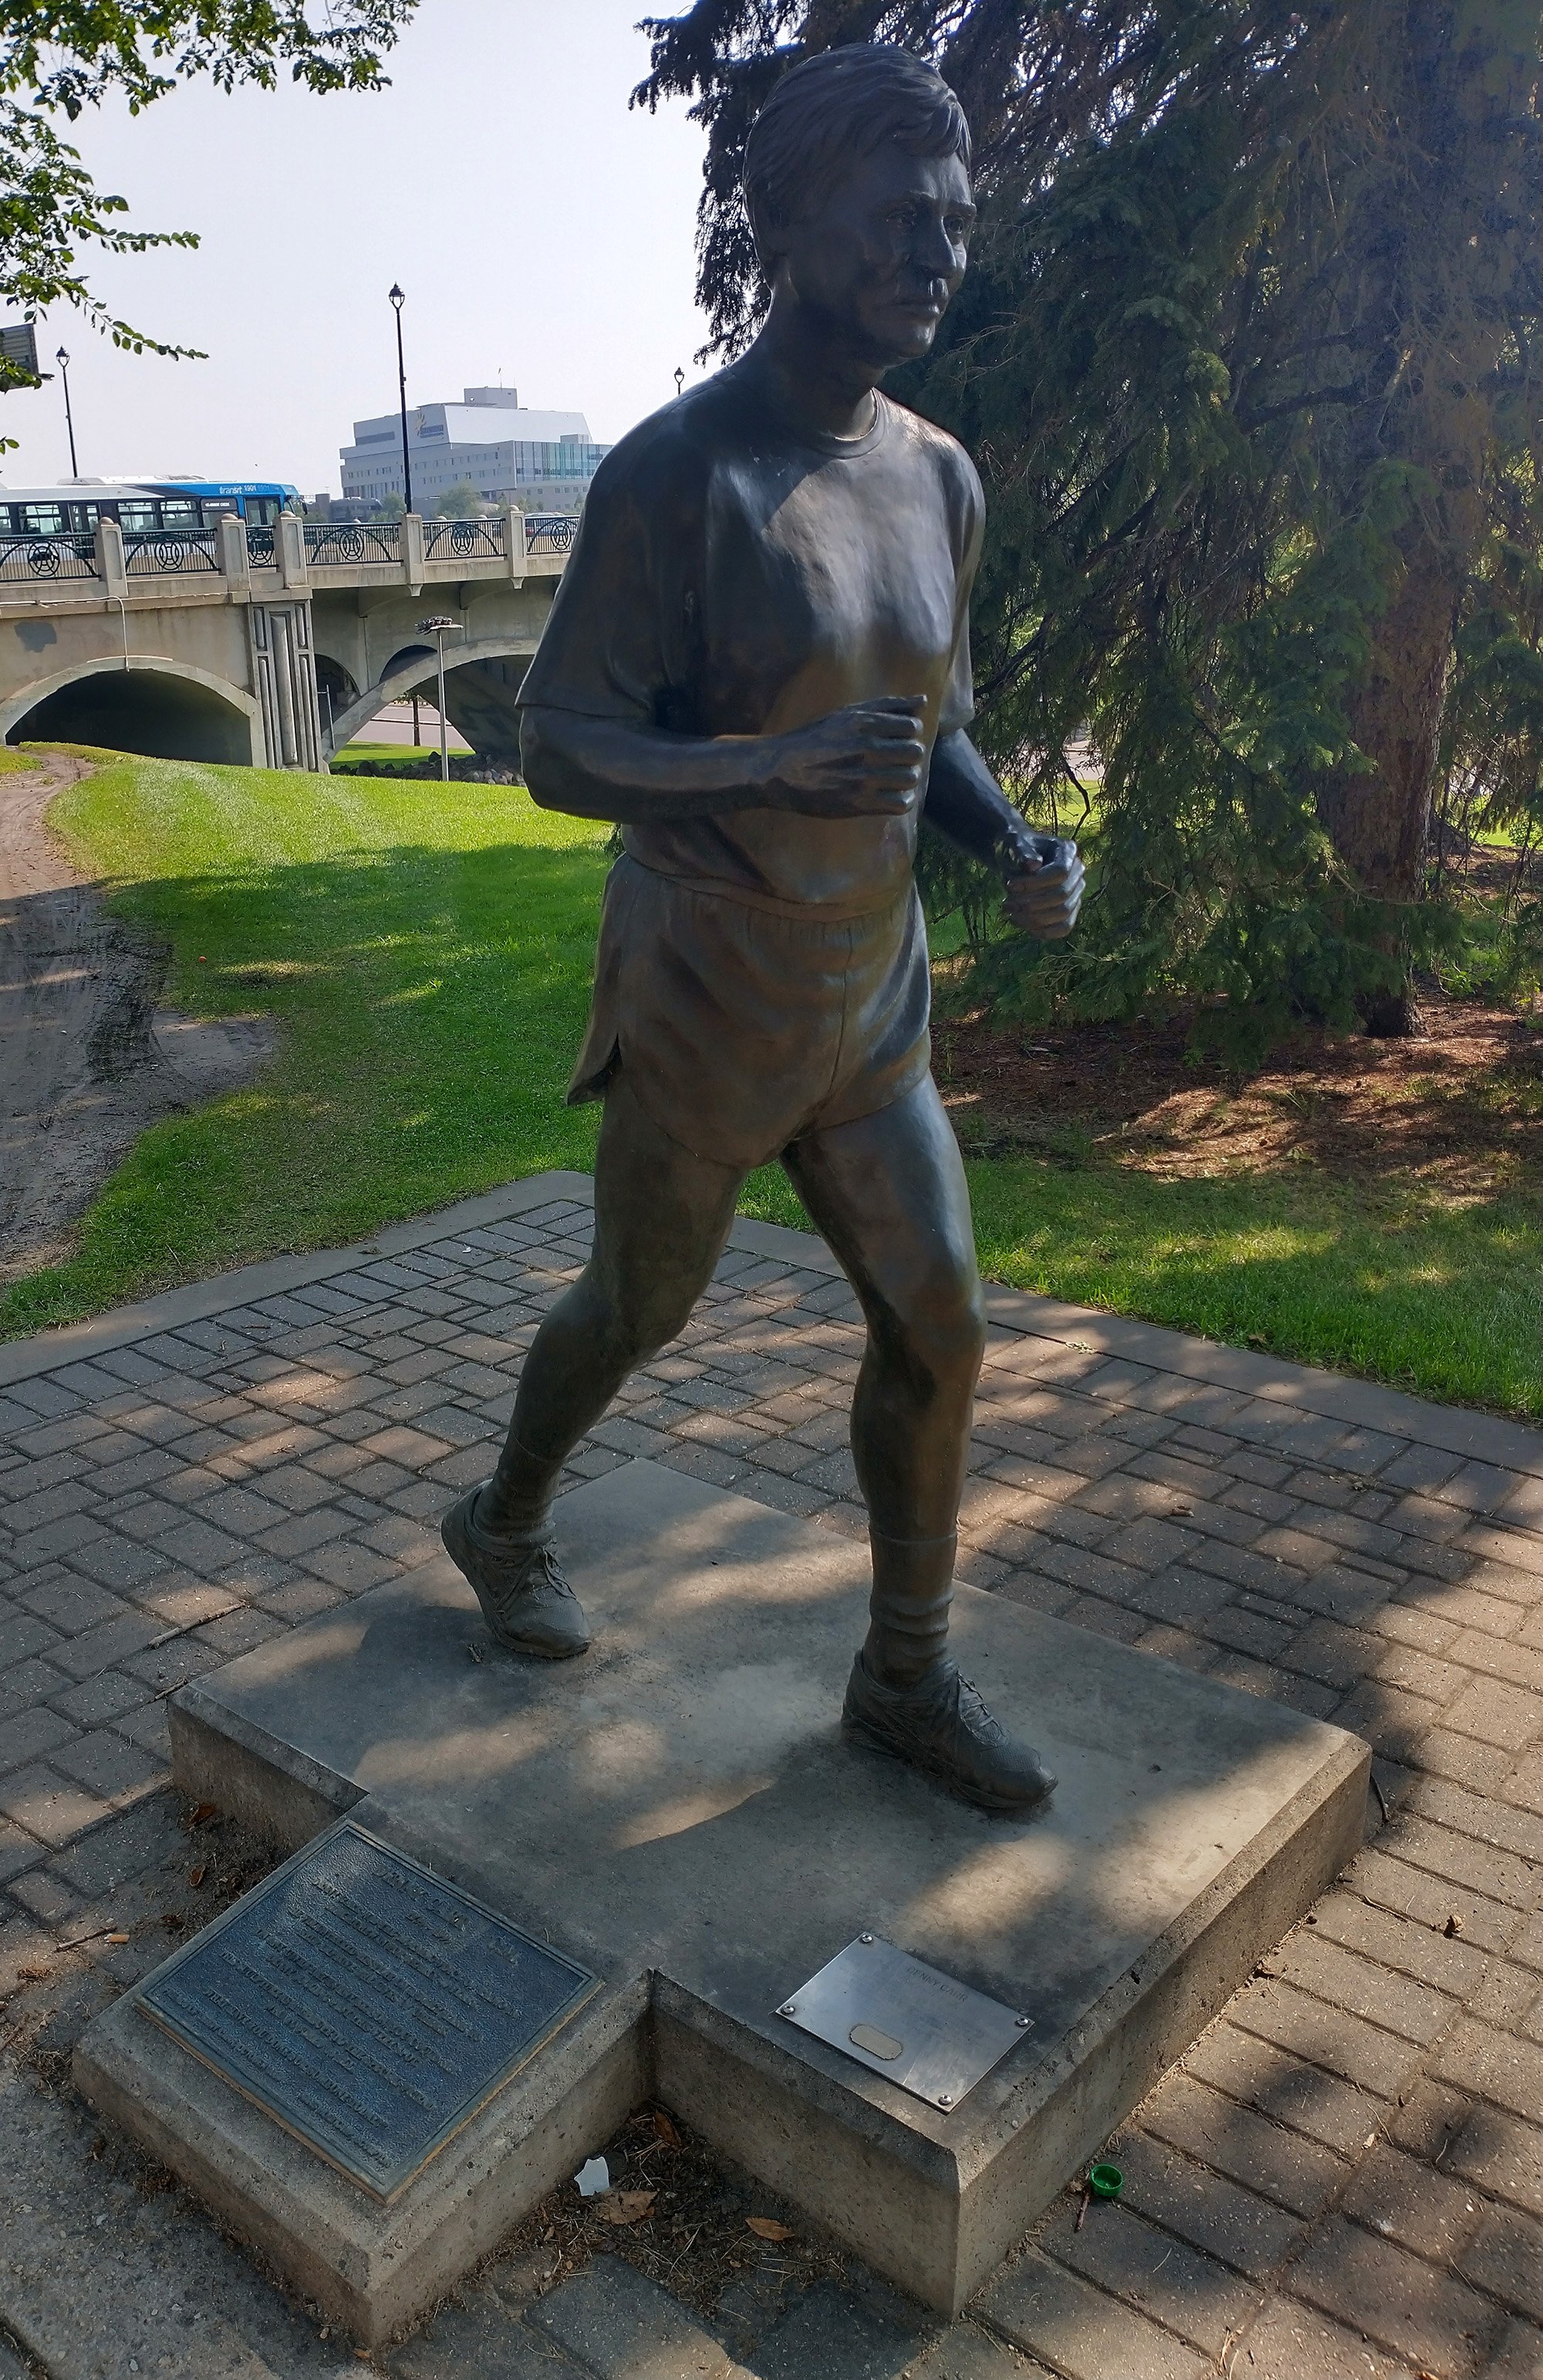 From a distance I thought it was another Terry Fox statue